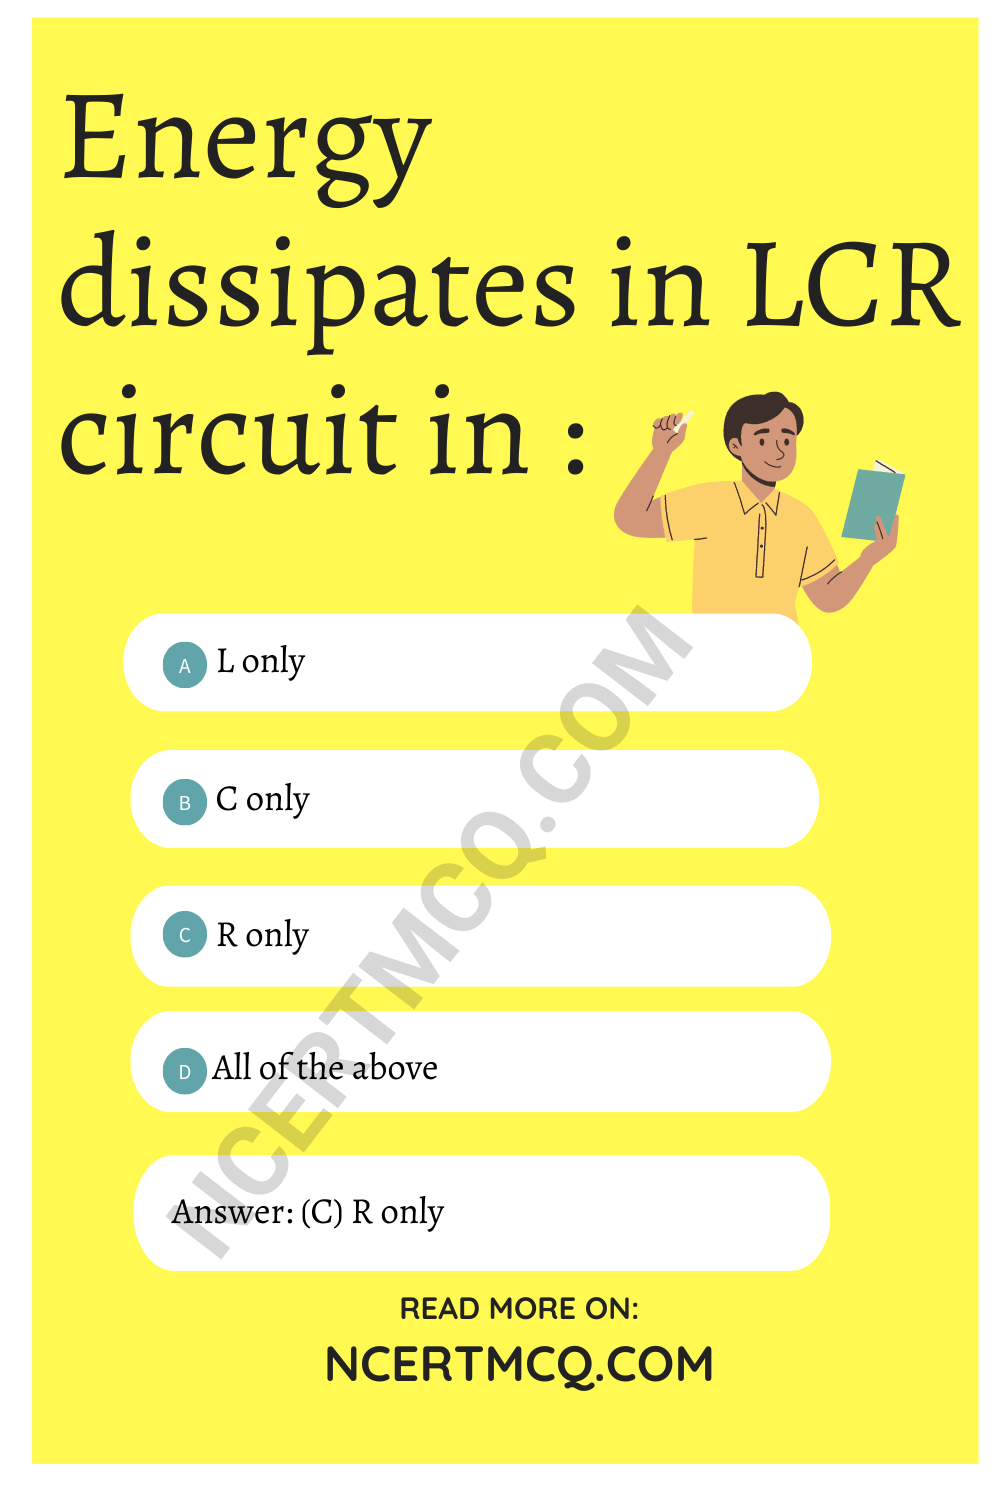 Energy dissipates in LCR circuit in :